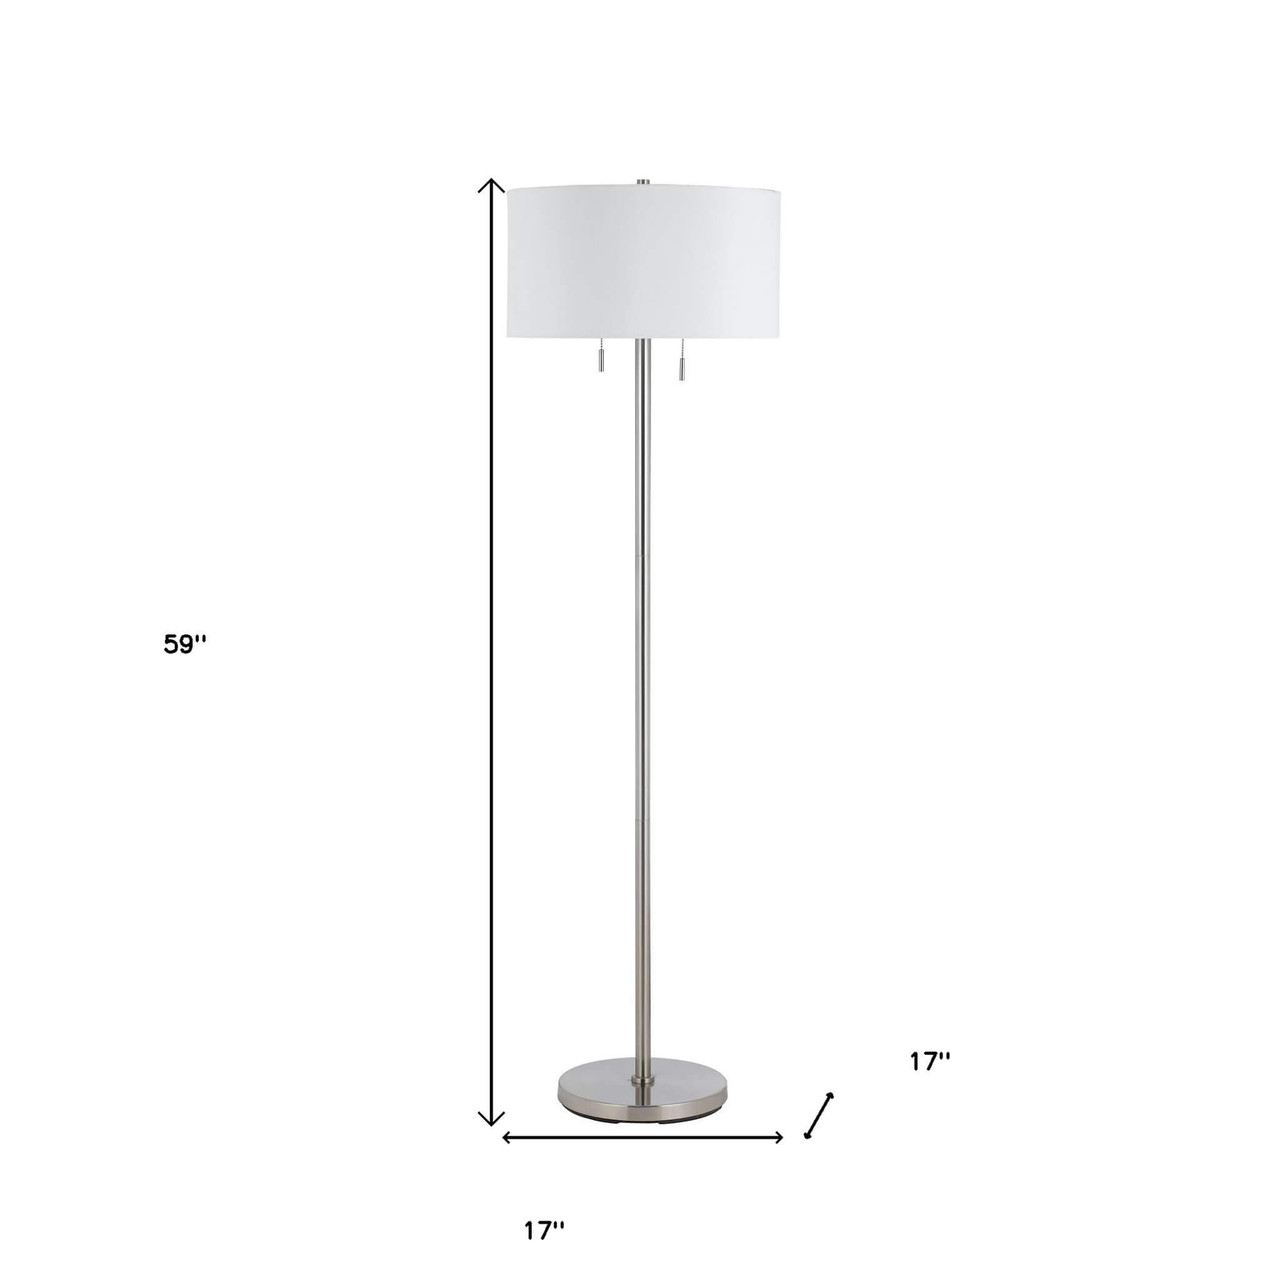 59" Nickel Two Light Traditional Shaped Floor Lamp With White Rectangular Shade - Chicken Pieces